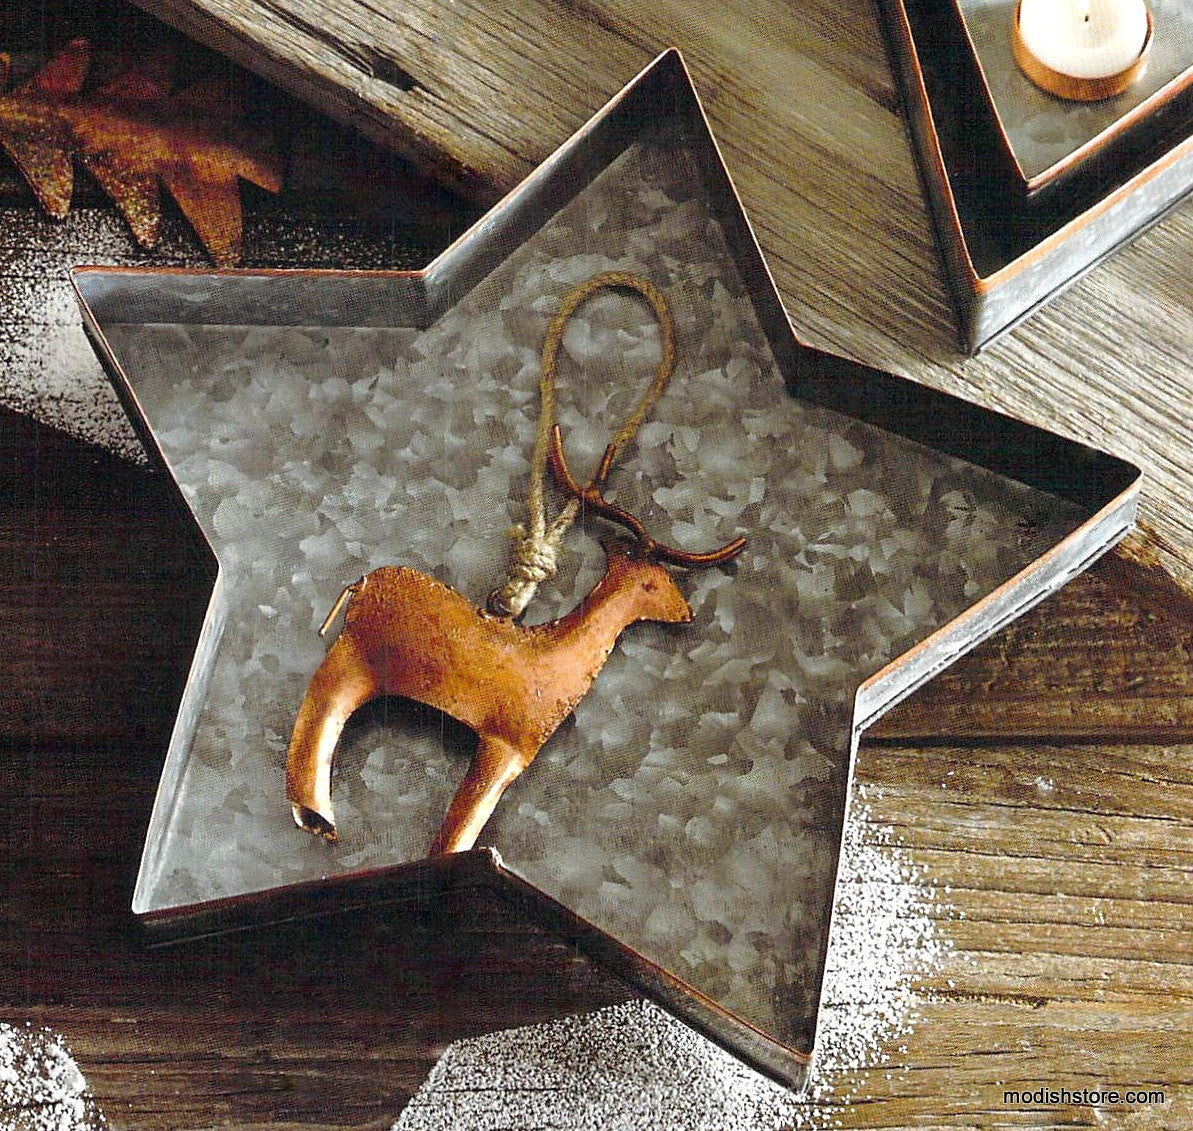 Roost Galisteo Copper Edge Star Trays - Set Of 5